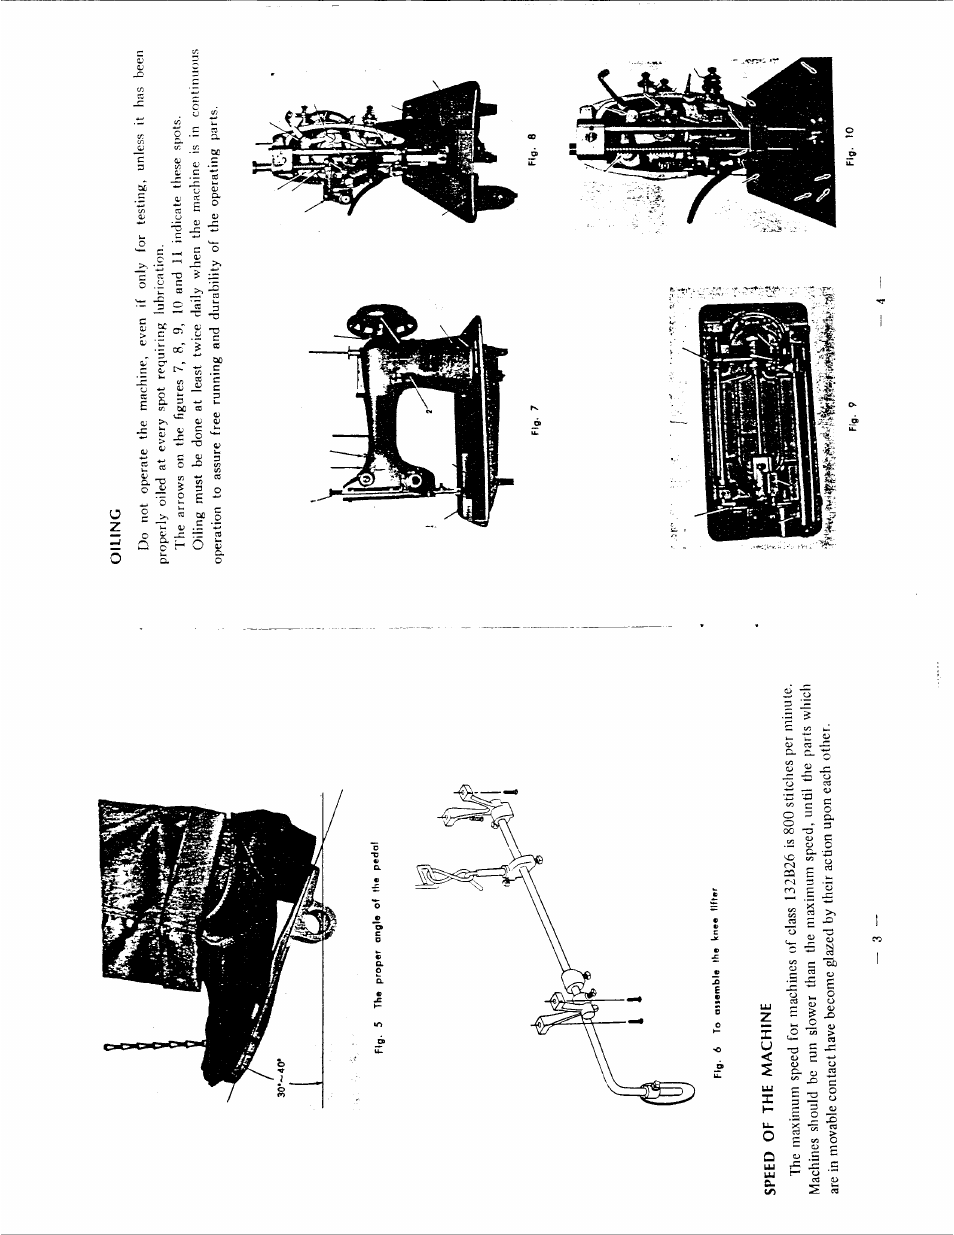 Speed of the machine, Oiling | SINGER 132B26 User Manual | Page 4 / 9